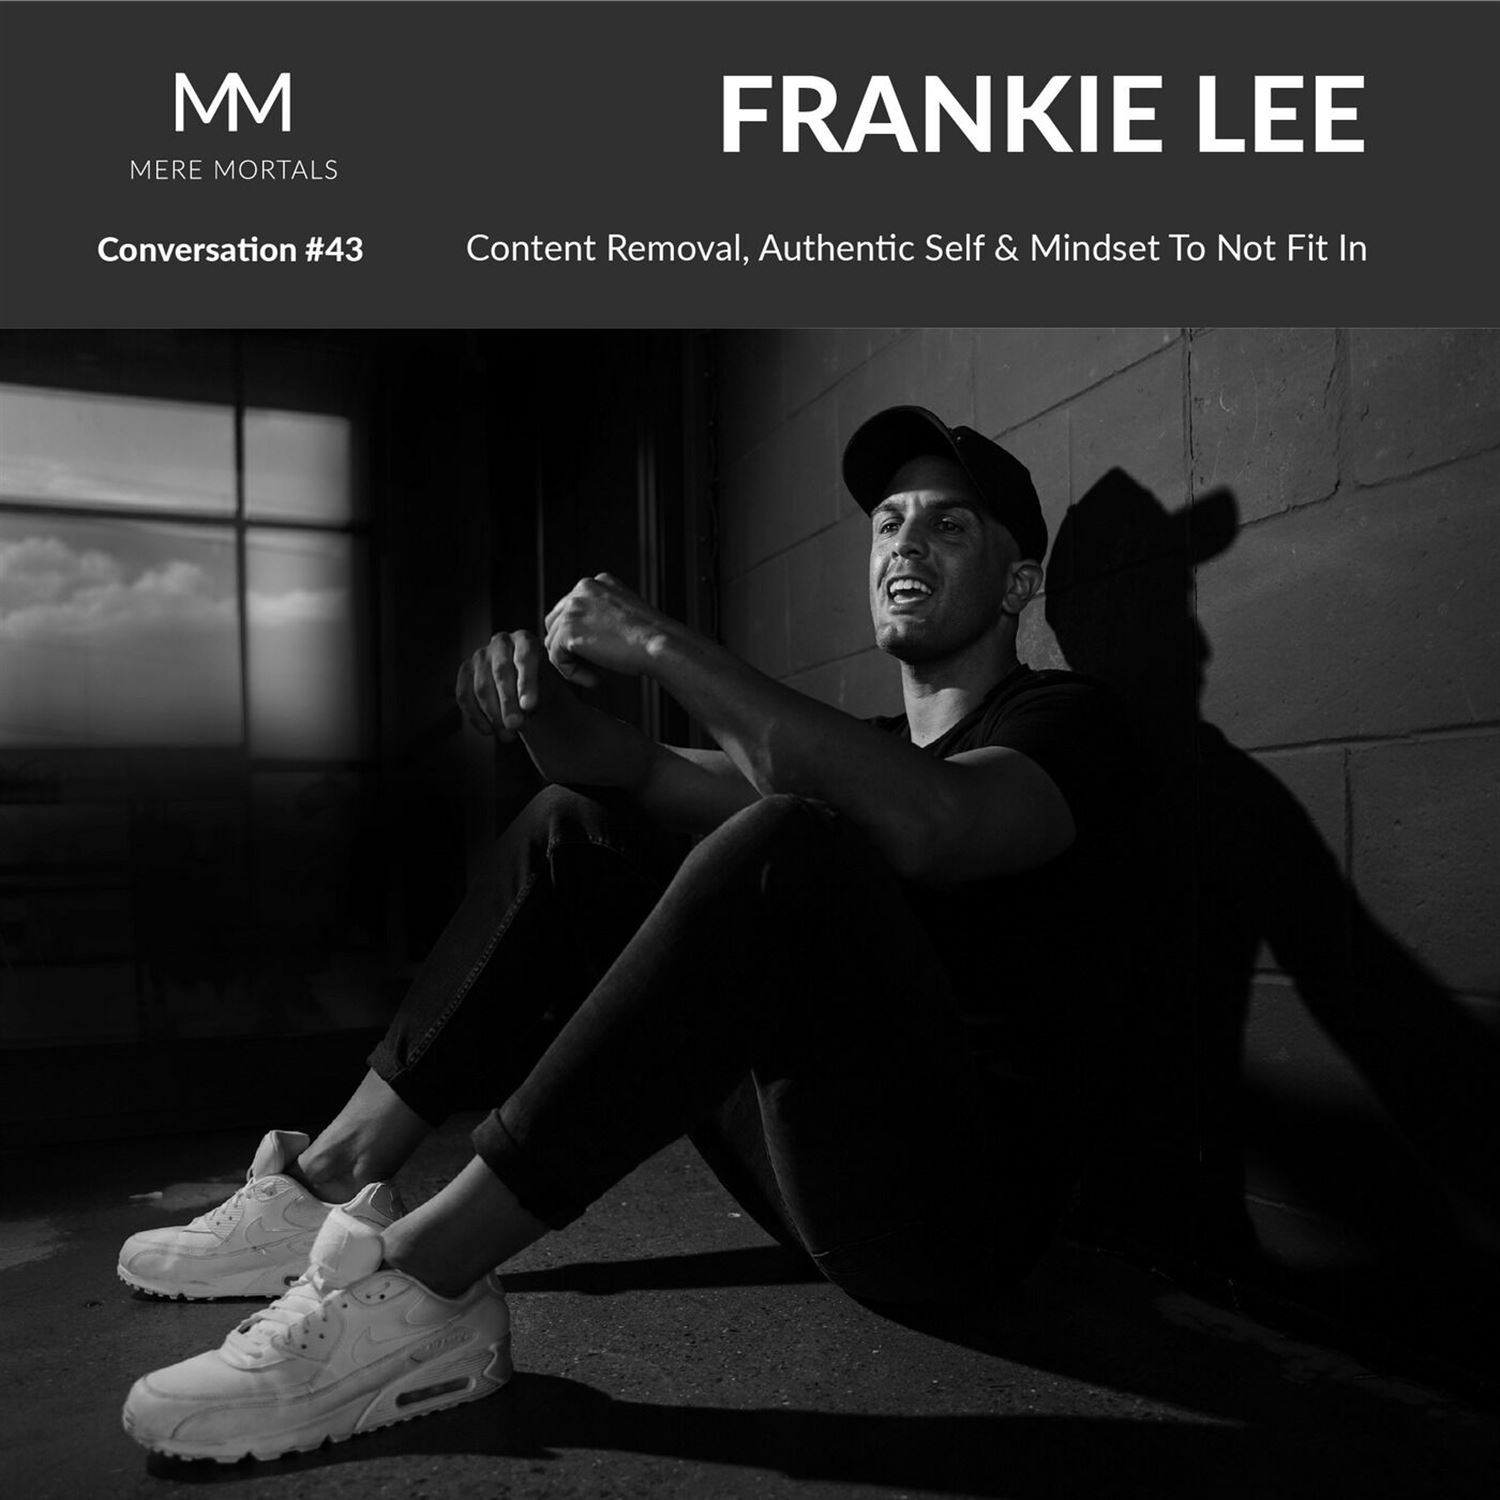 FRANKIE LEE | Content Removal, Authentic Self & Mindset To Not Fit In: Mere Mortals Conversation #43